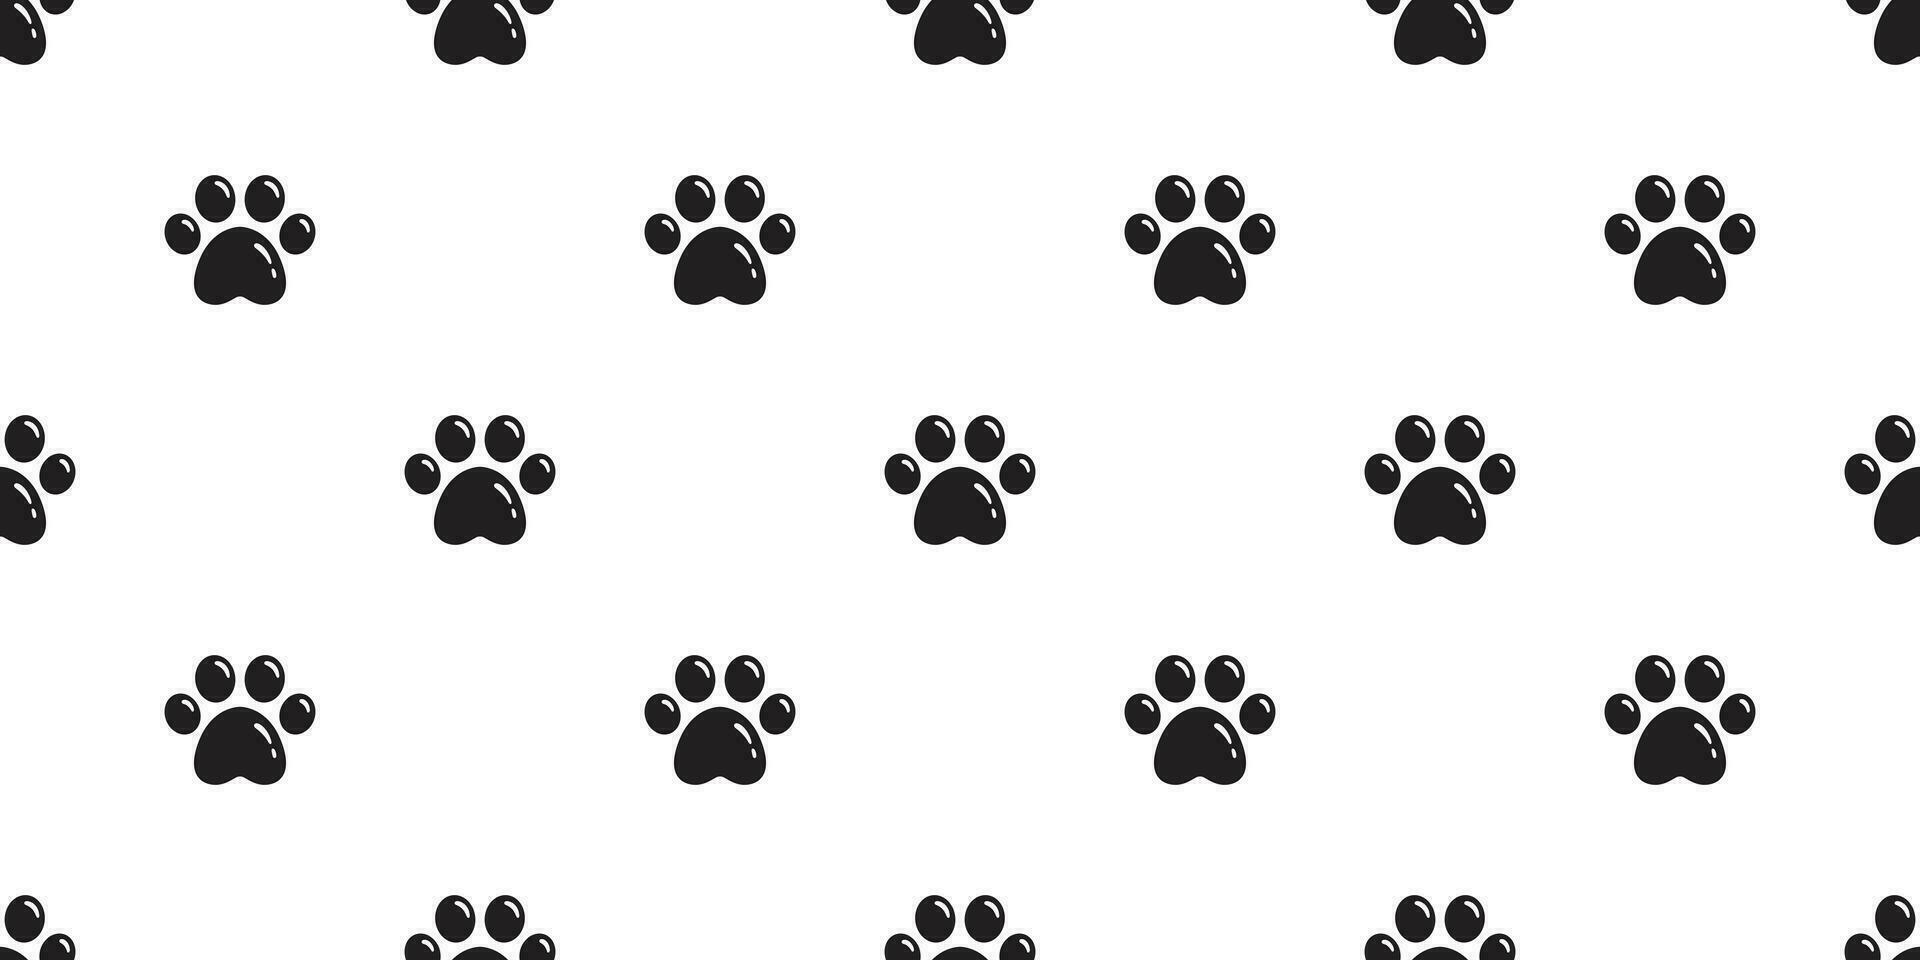 Dog Paw seamless pattern vector french bulldog footprint cartoon tile background repeat wallpaper scarf isolated gift wrap illustration